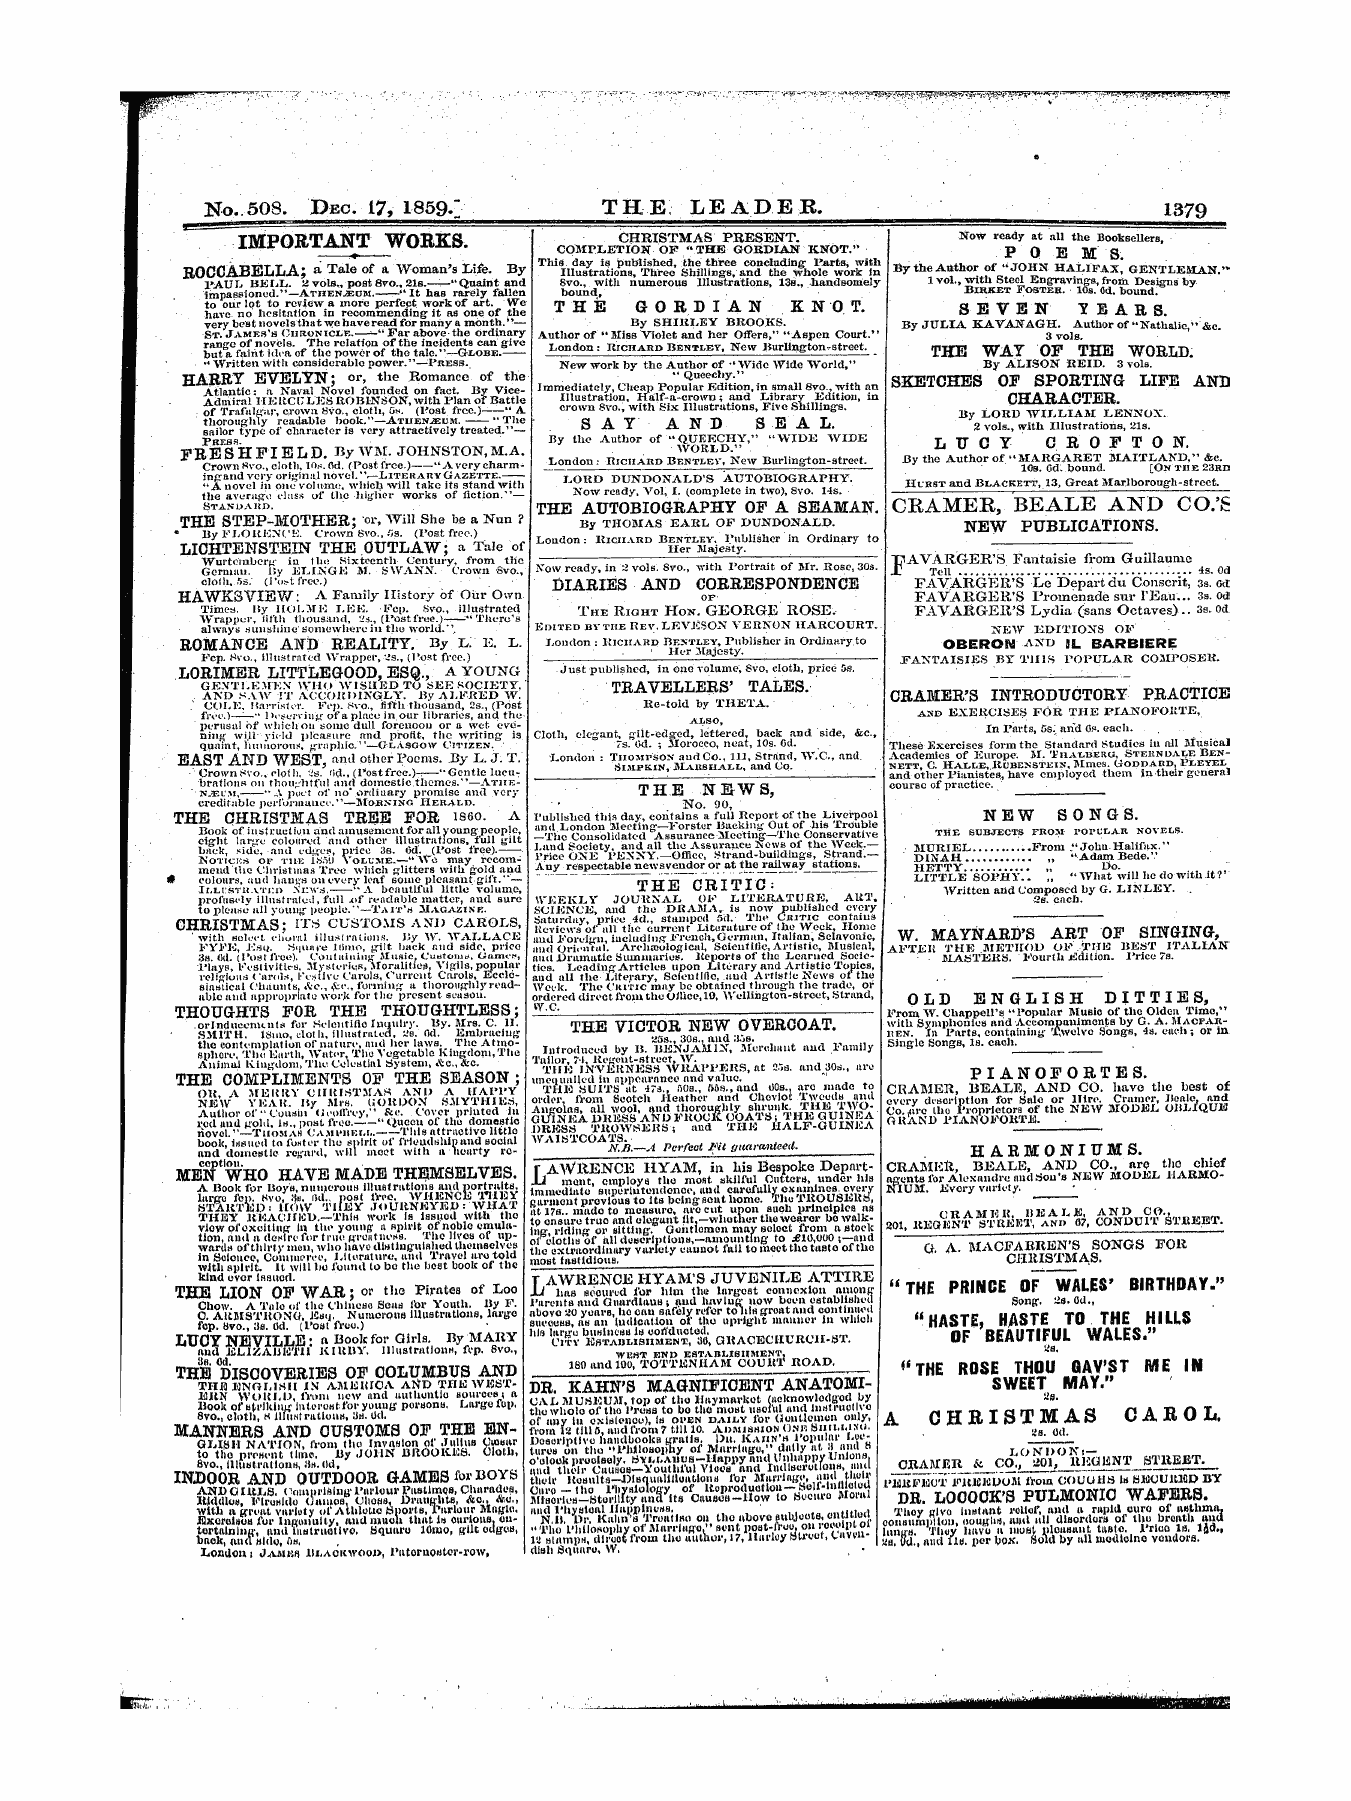 Leader (1850-1860): jS F Y, 1st edition: 23